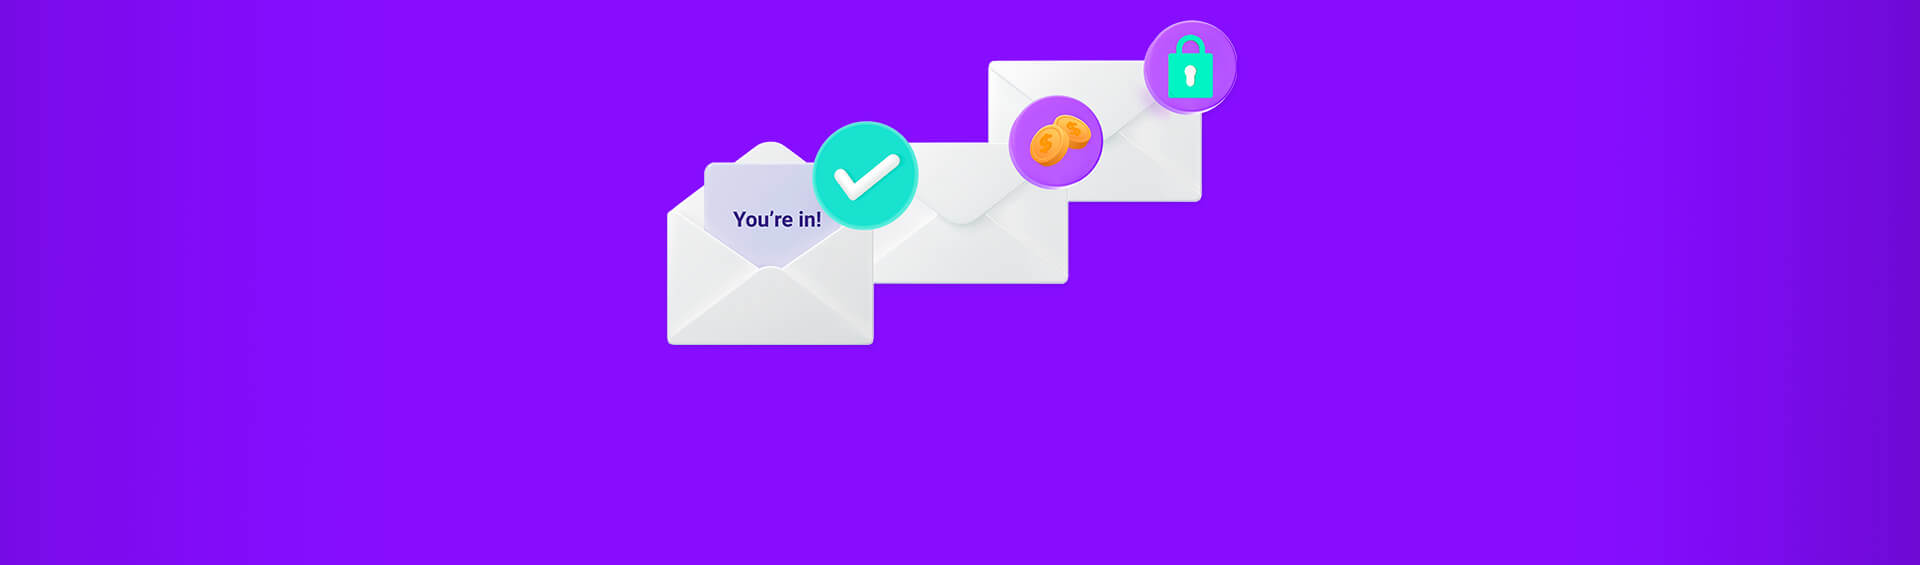 Guide on Transactional Emails: Types, Examples and Best Practices